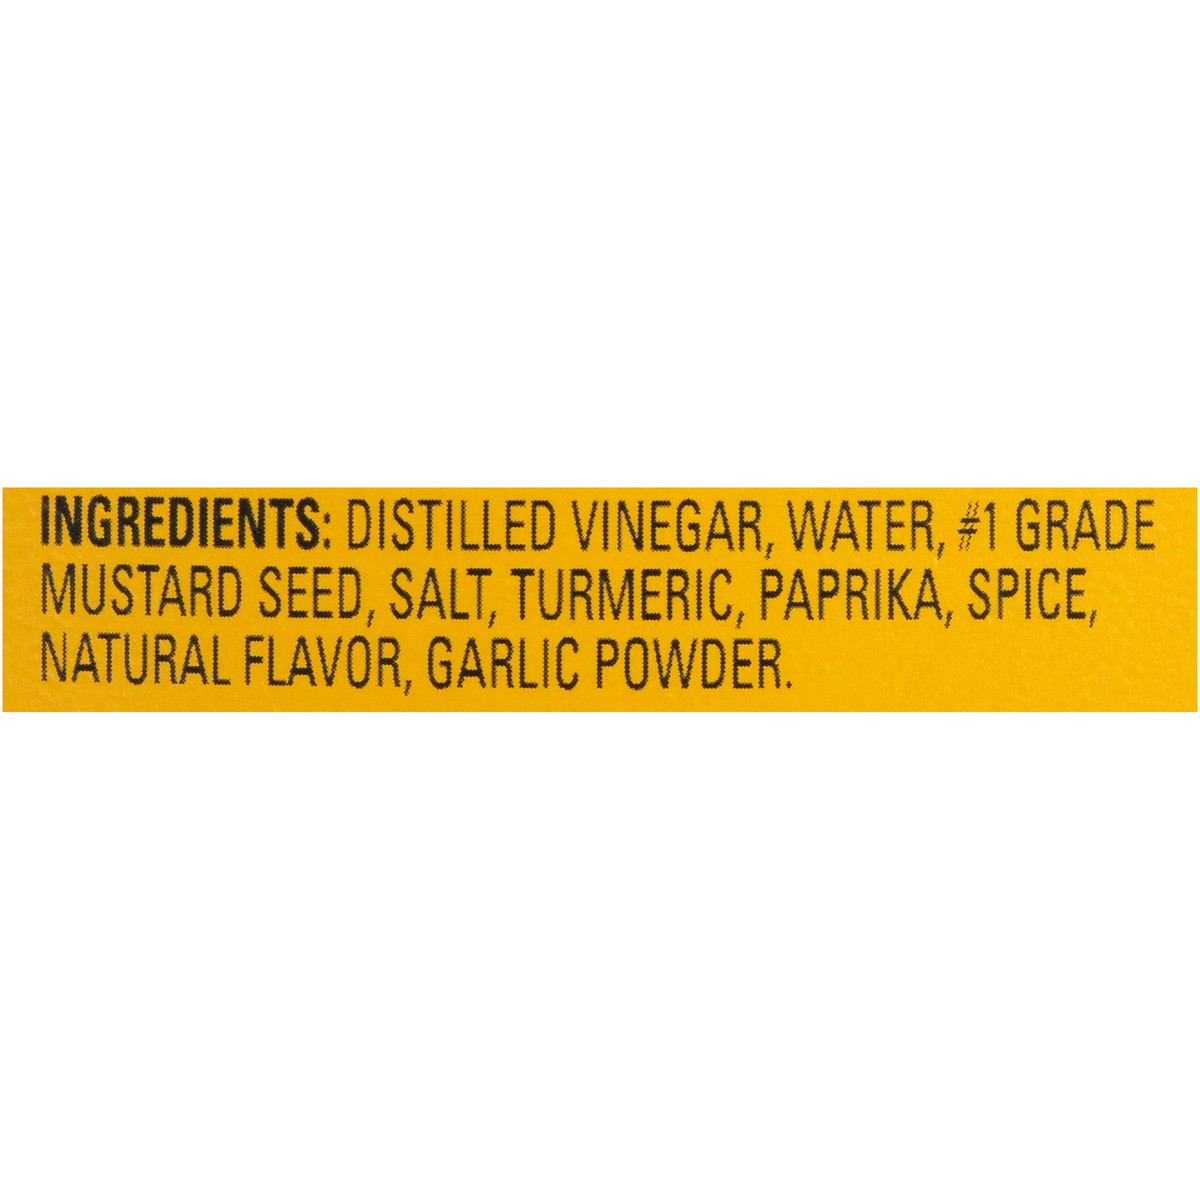 slide 7 of 13, French's Classic Yellow Mustard, 20 oz, 20 oz